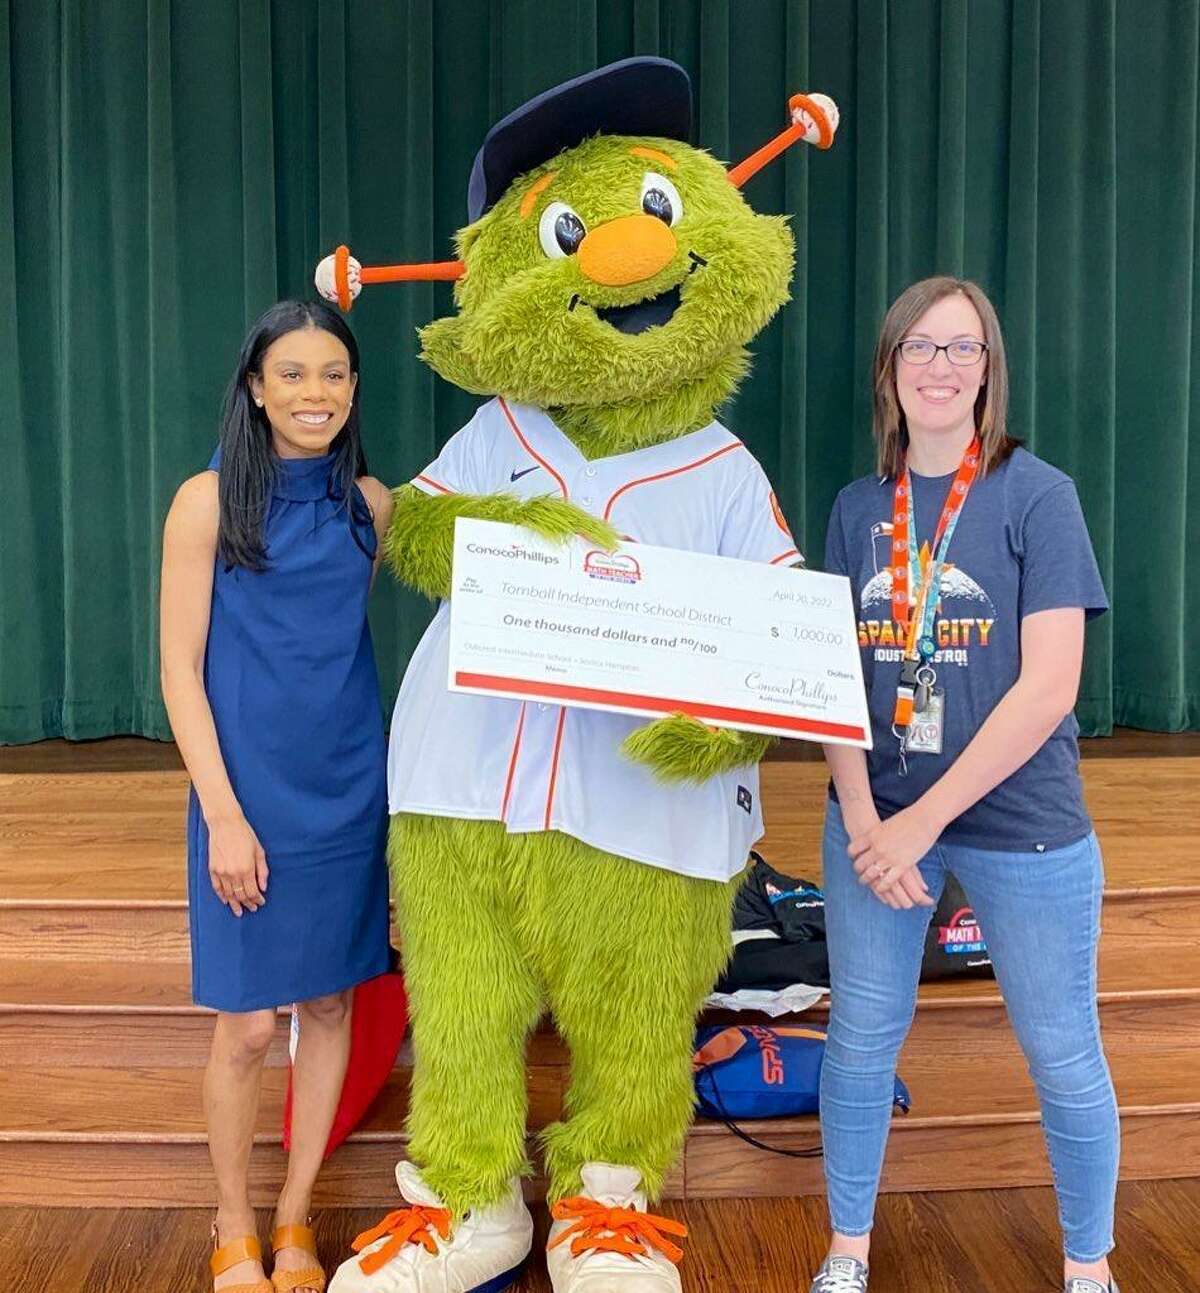 Fifth grade teacher Jessica Hampton of Oakcrest Intermediate School and Algebra I teacher Jennifer Koster of Tomball Memorial High School were named ConocoPhillips Math Teachers of the Month on Wednesday, April 20, Tomball ISD announced in a news release.